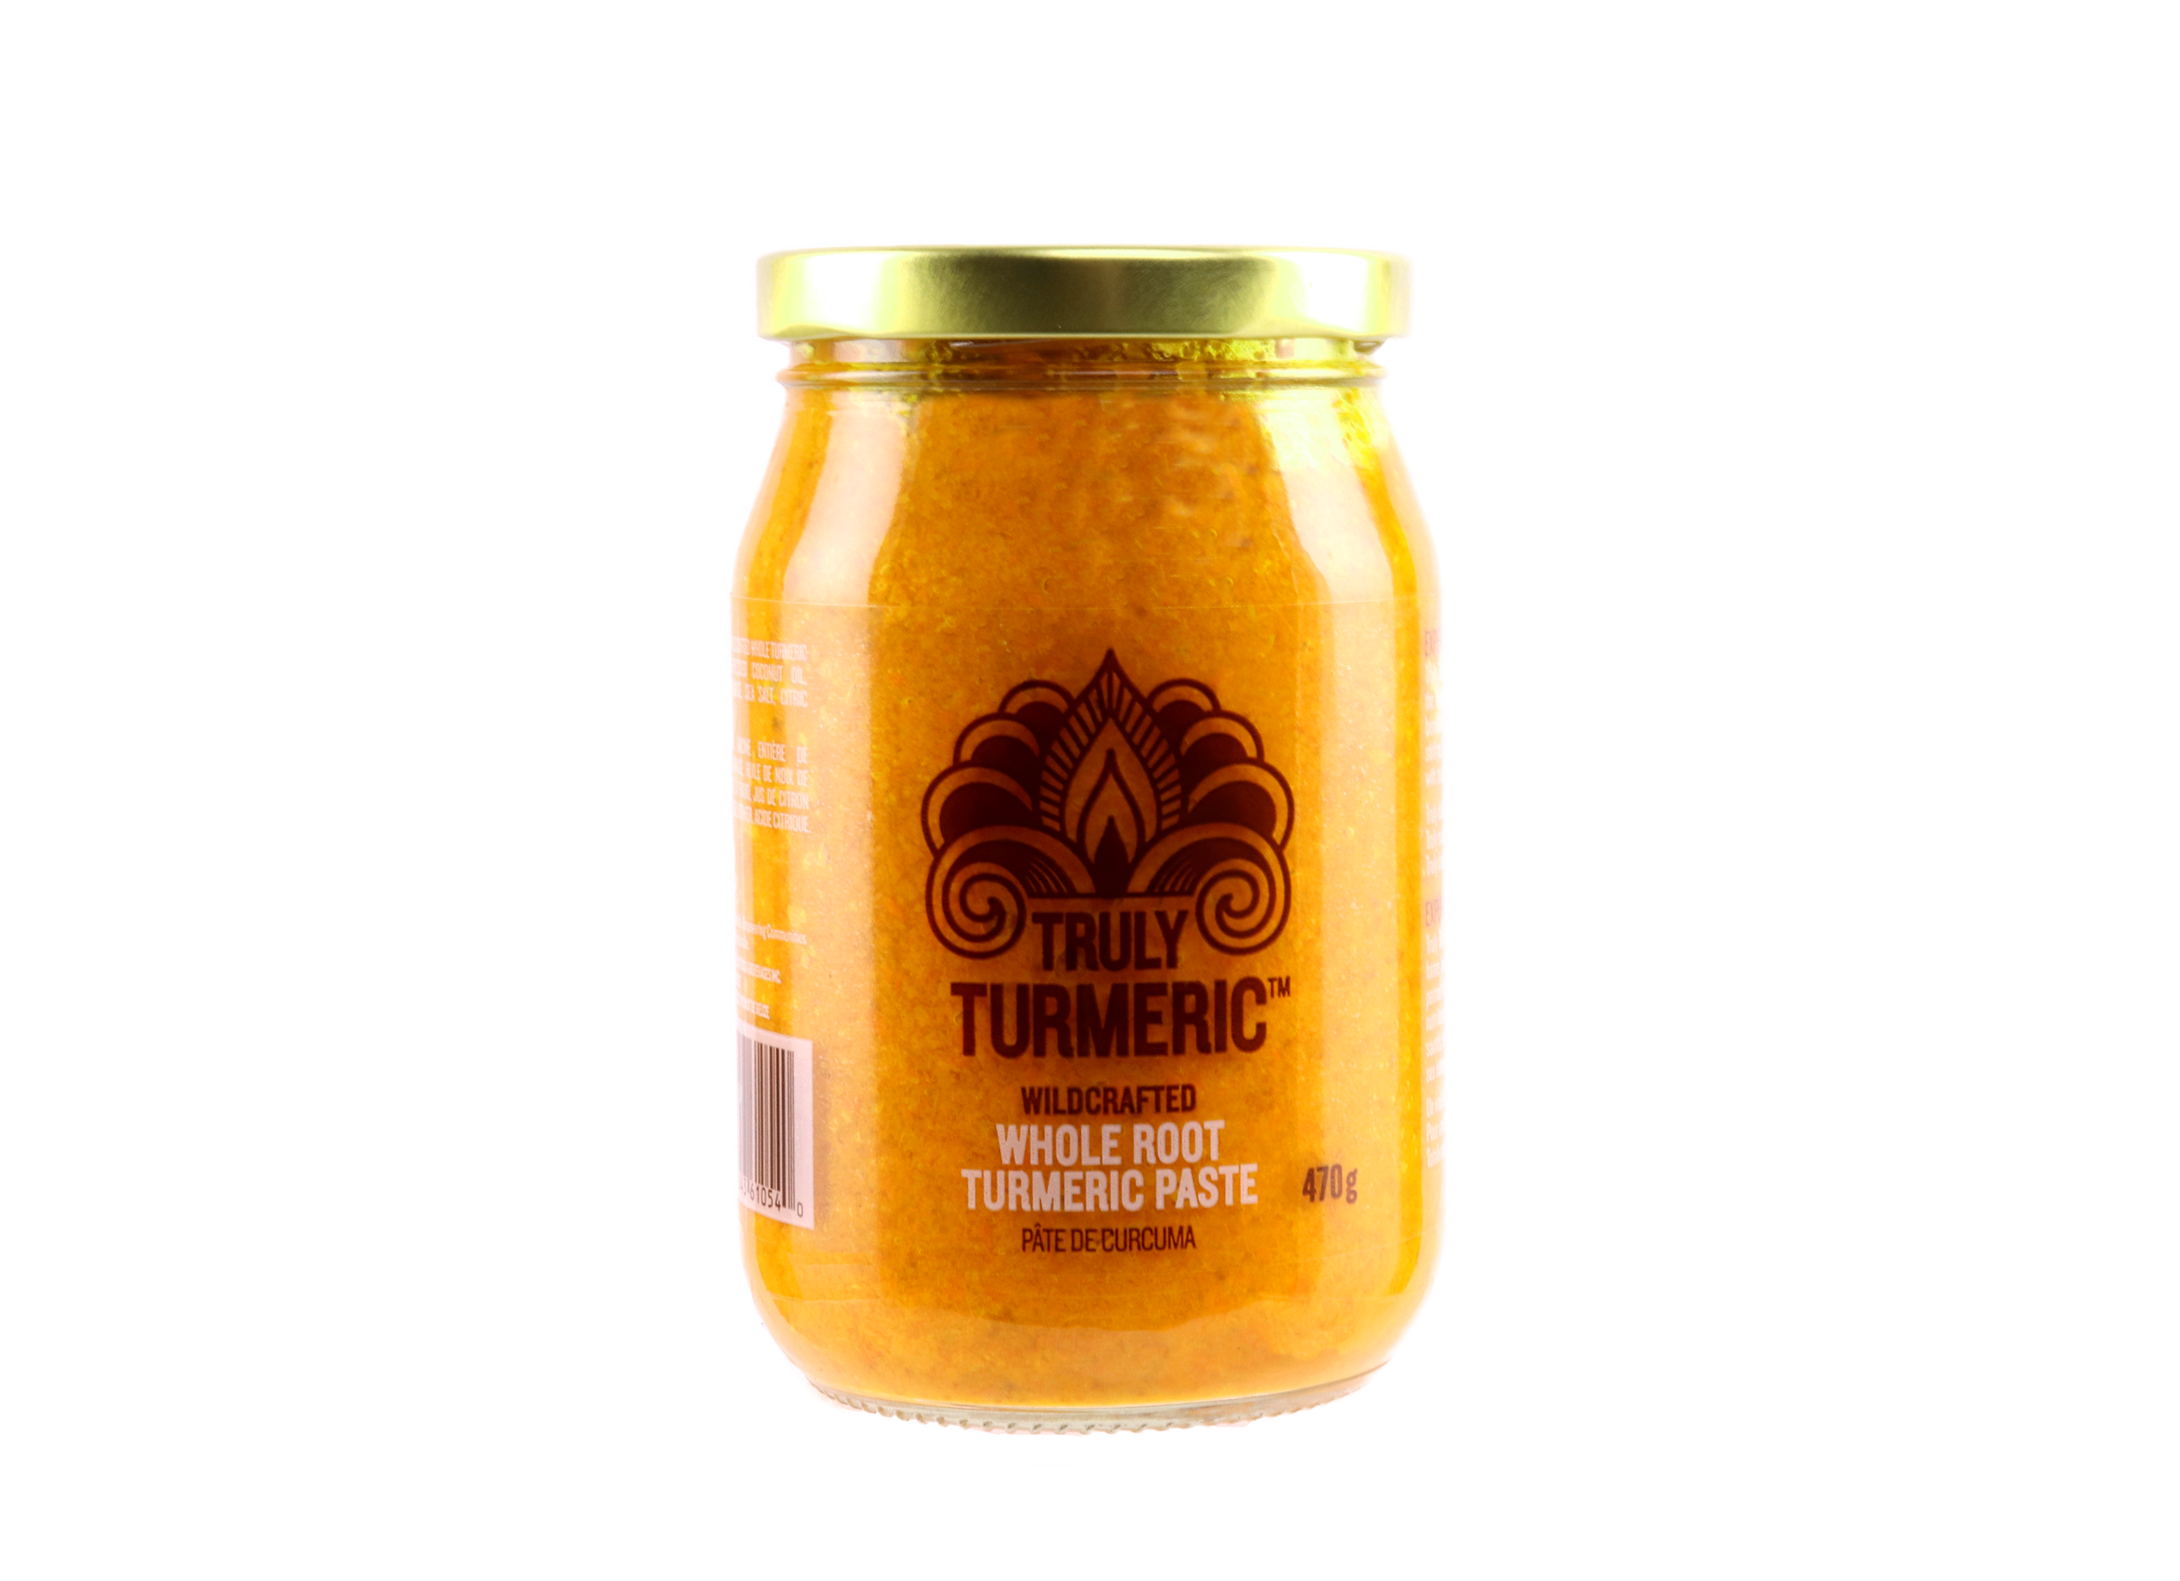 Truly Turmeric - Whole root regular paste - (470g)